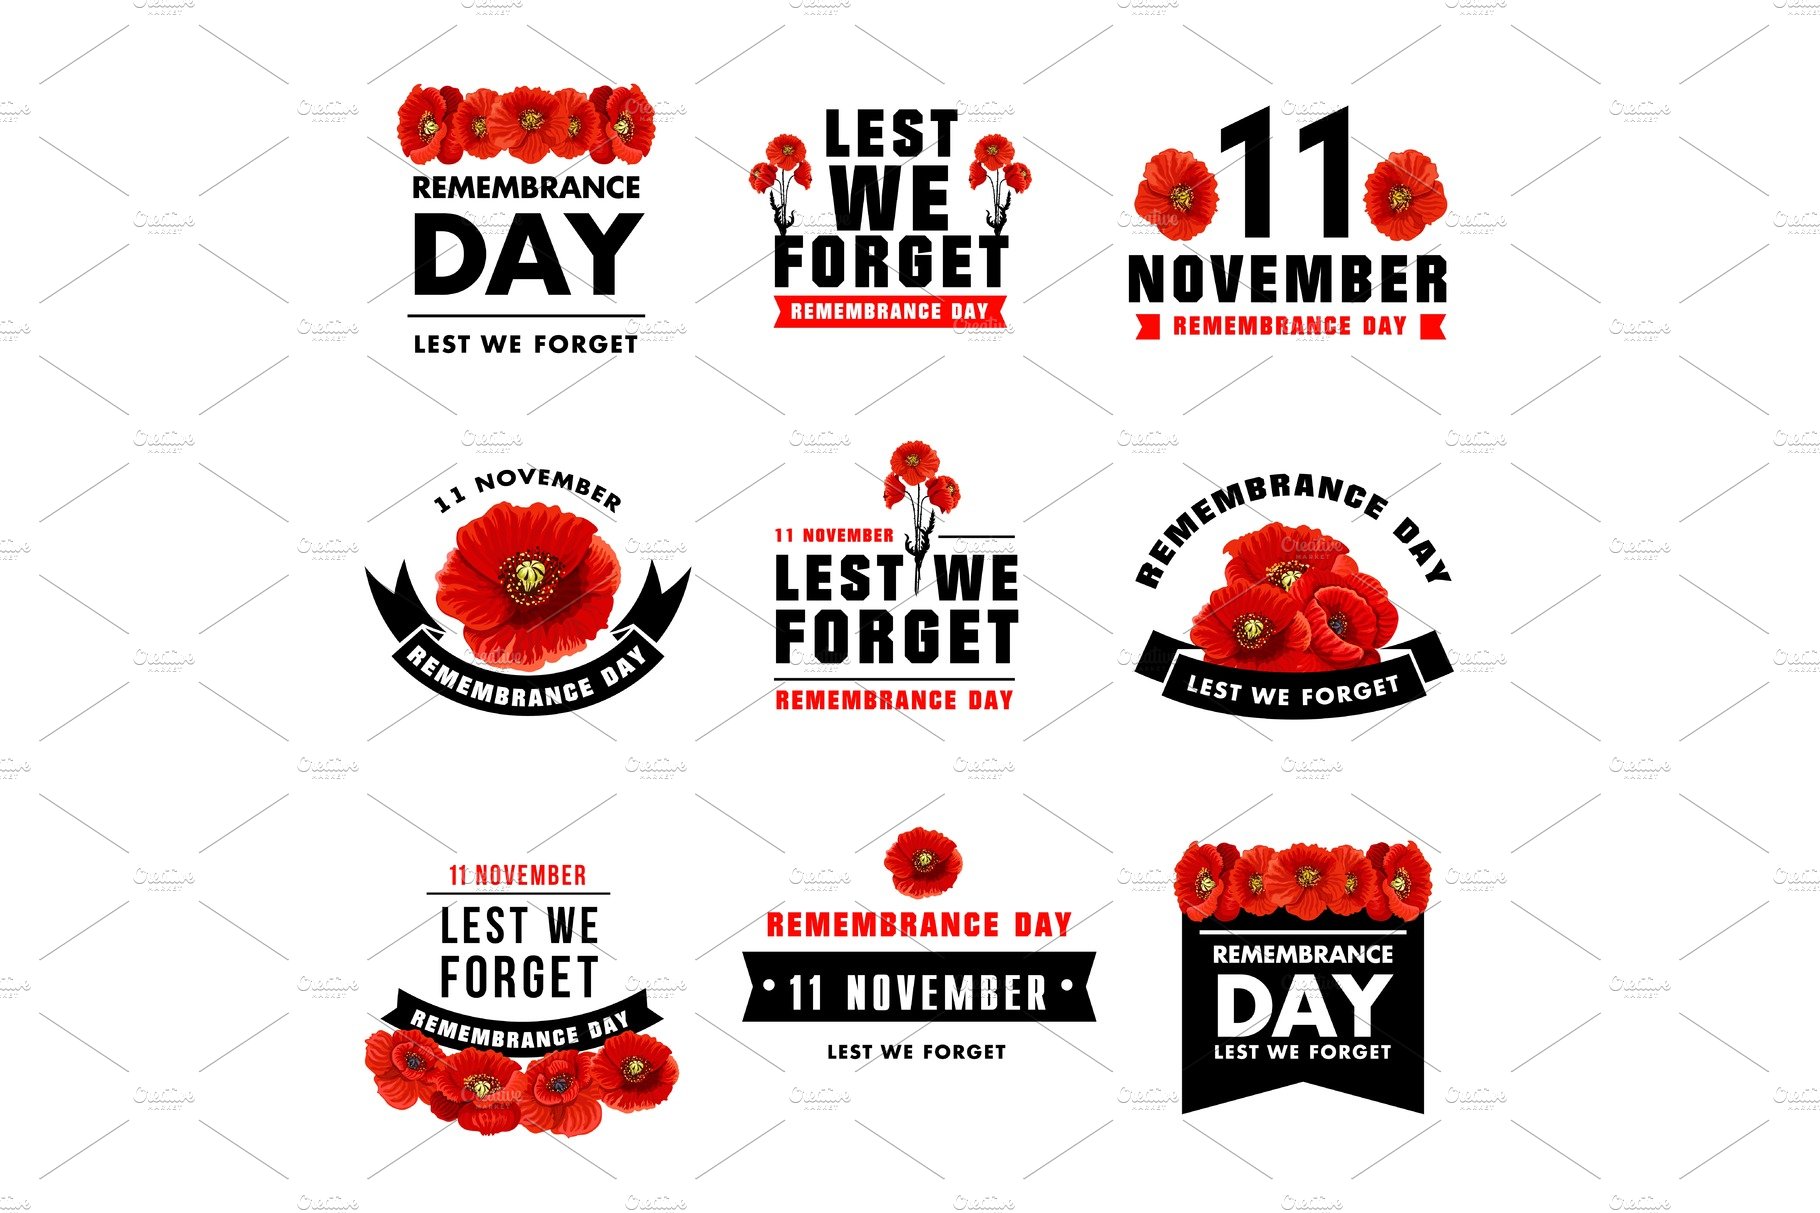 Red poppy icon for Remembrance Day cover image.